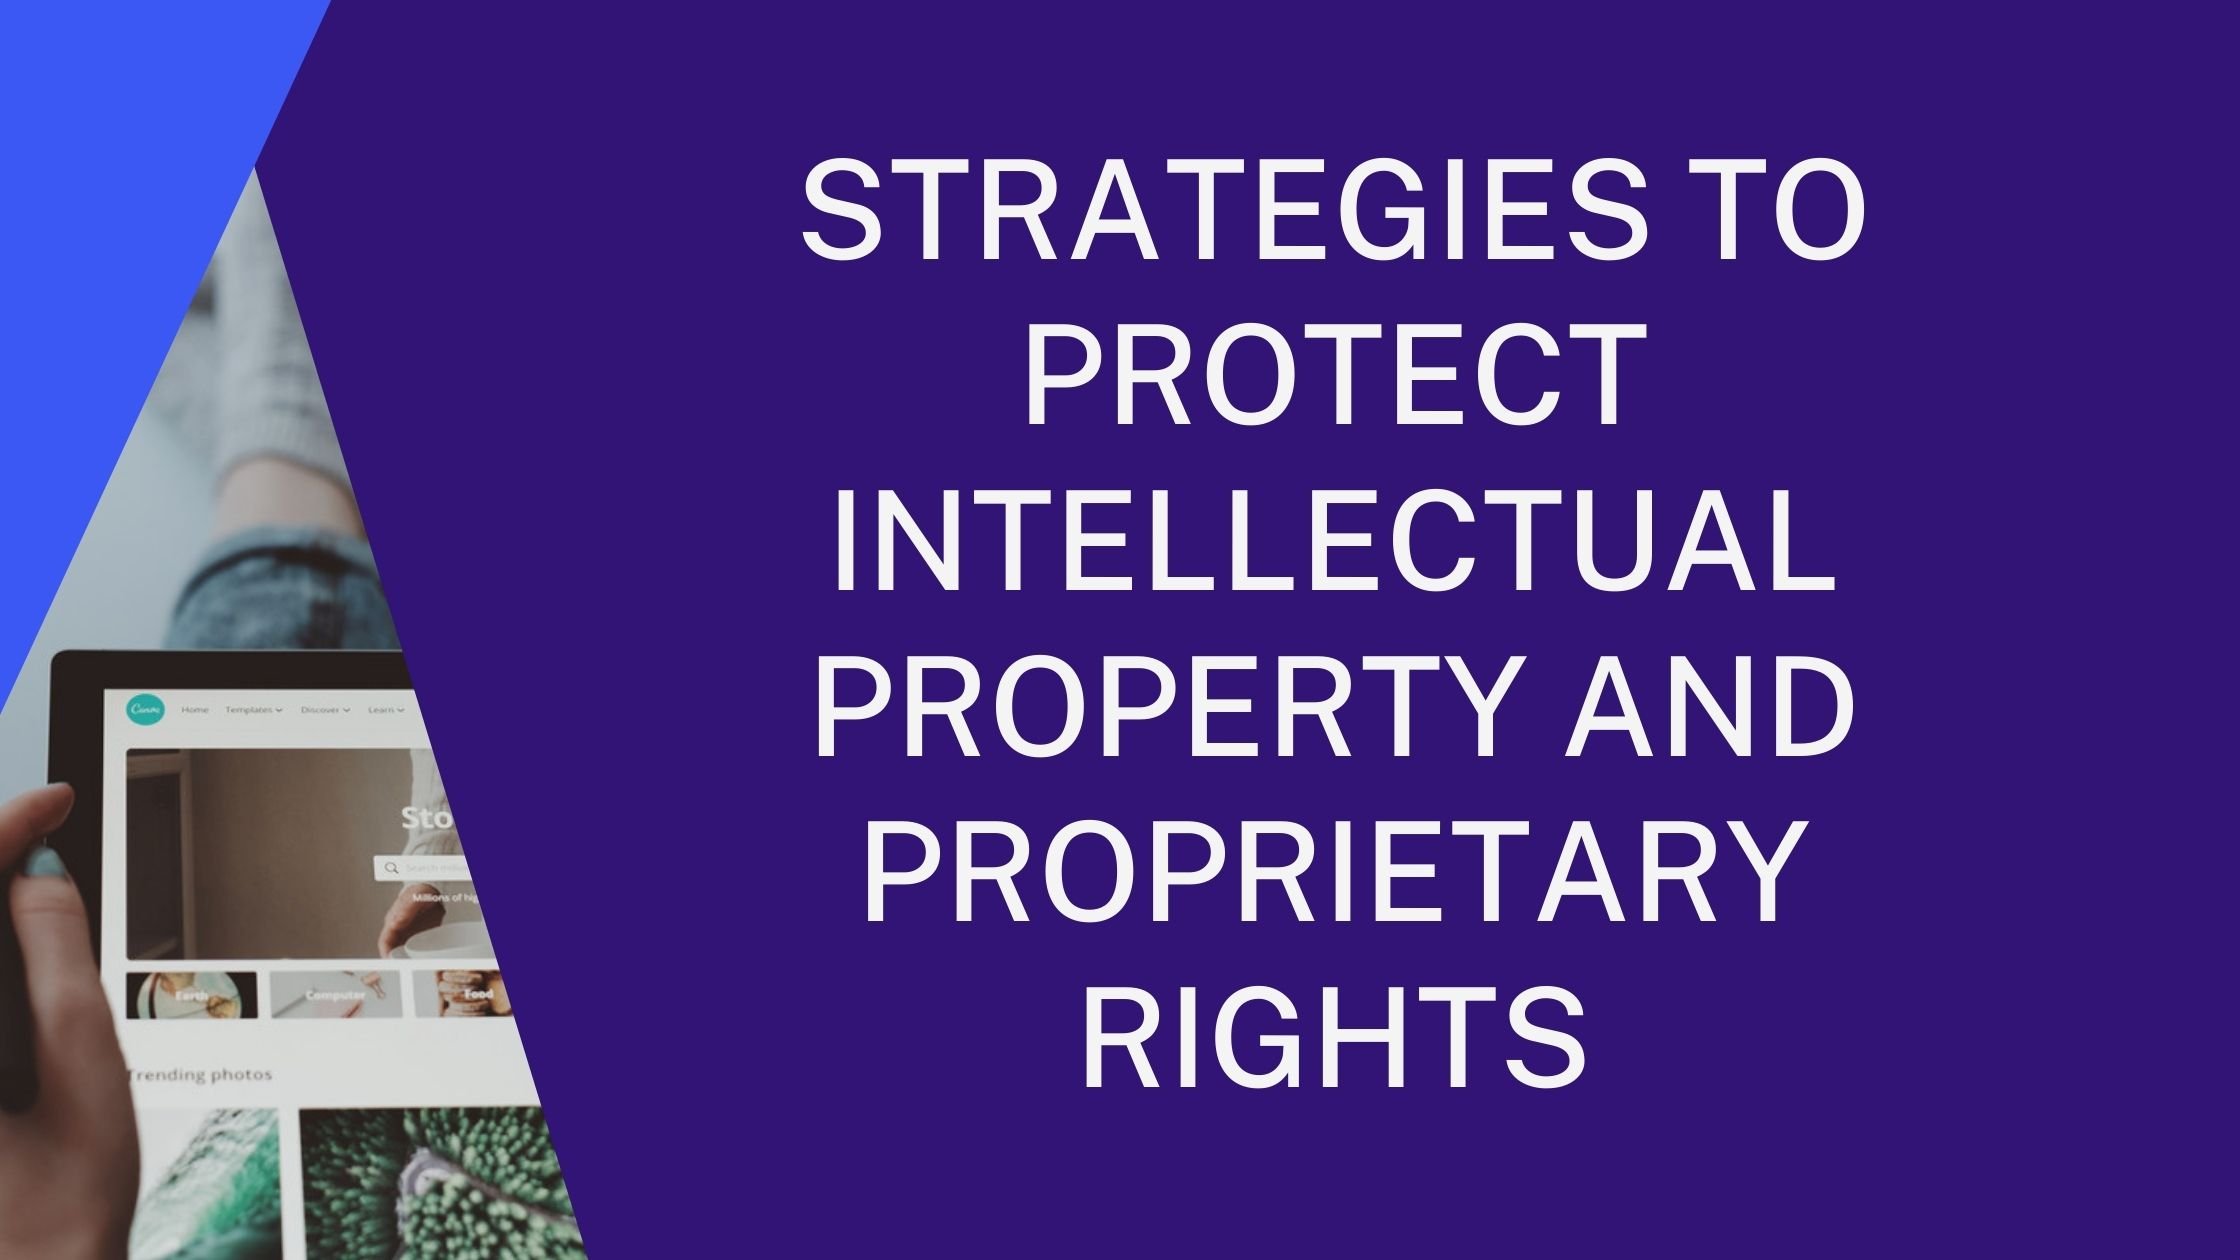 STRATEGIES TO PROTECT INTELLECTUAL PROPERTY AND PROPRIETARY RIGHTS